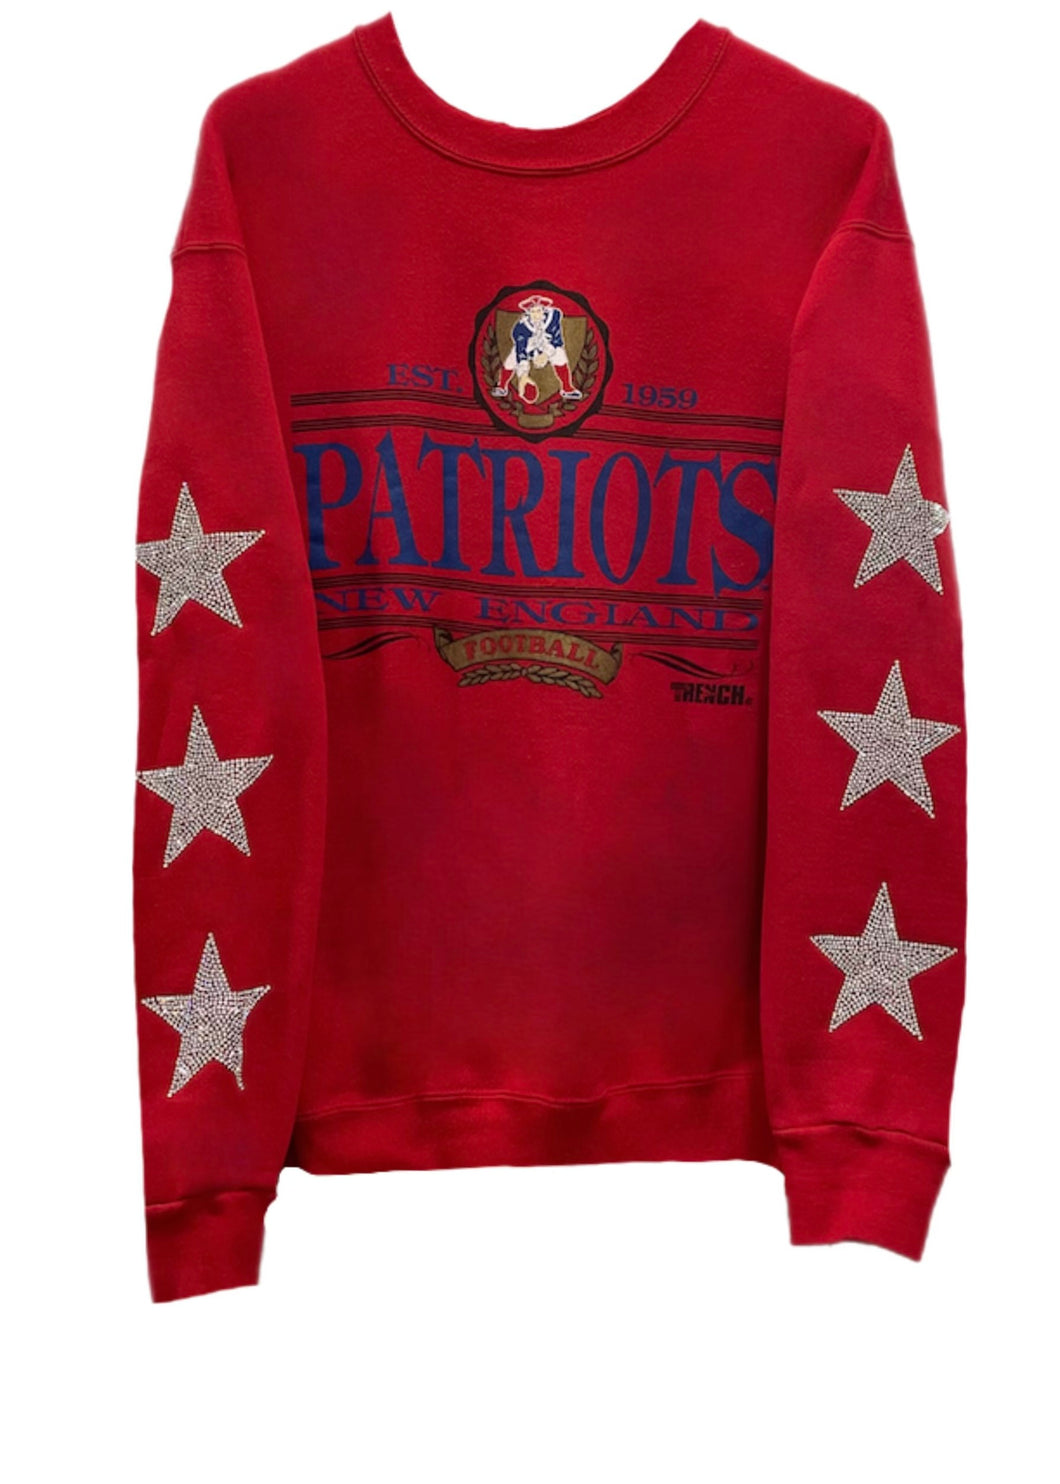 New England Patriots, NFL One of a KIND Vintage Sweatshirt with Three Crystal Star Design